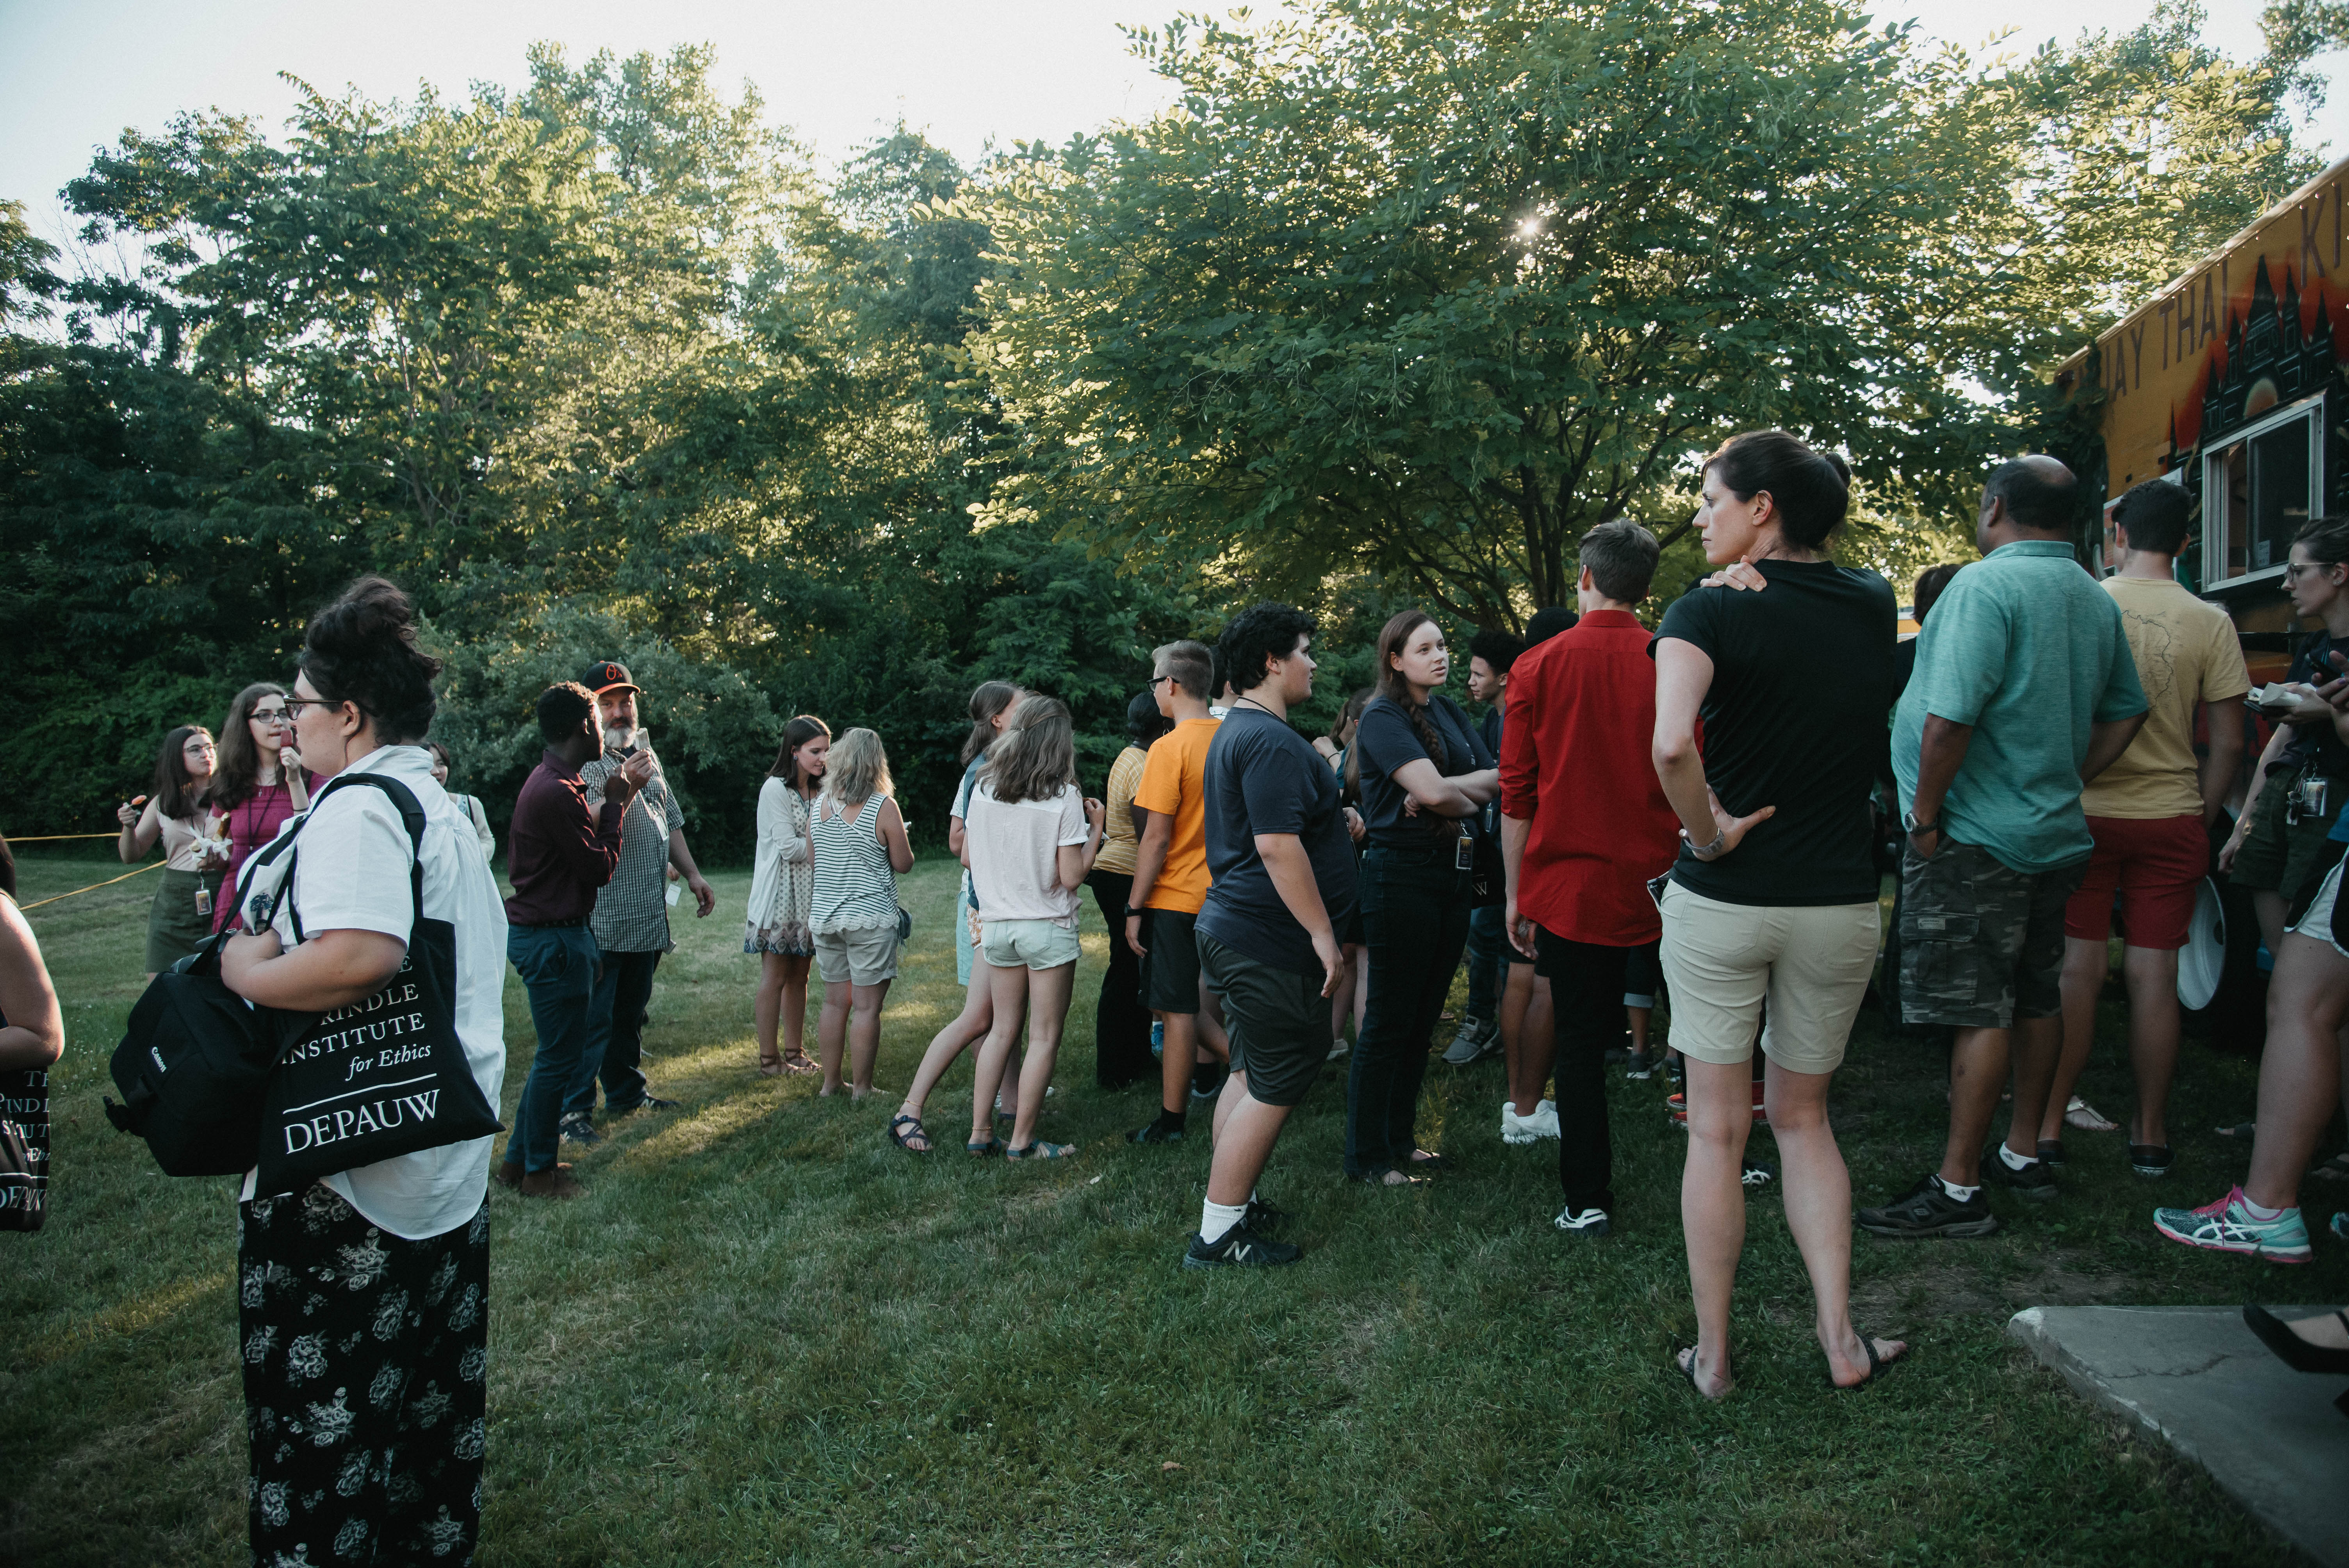 A large group of young students and adults stand in line for a food truck on a grassy field.